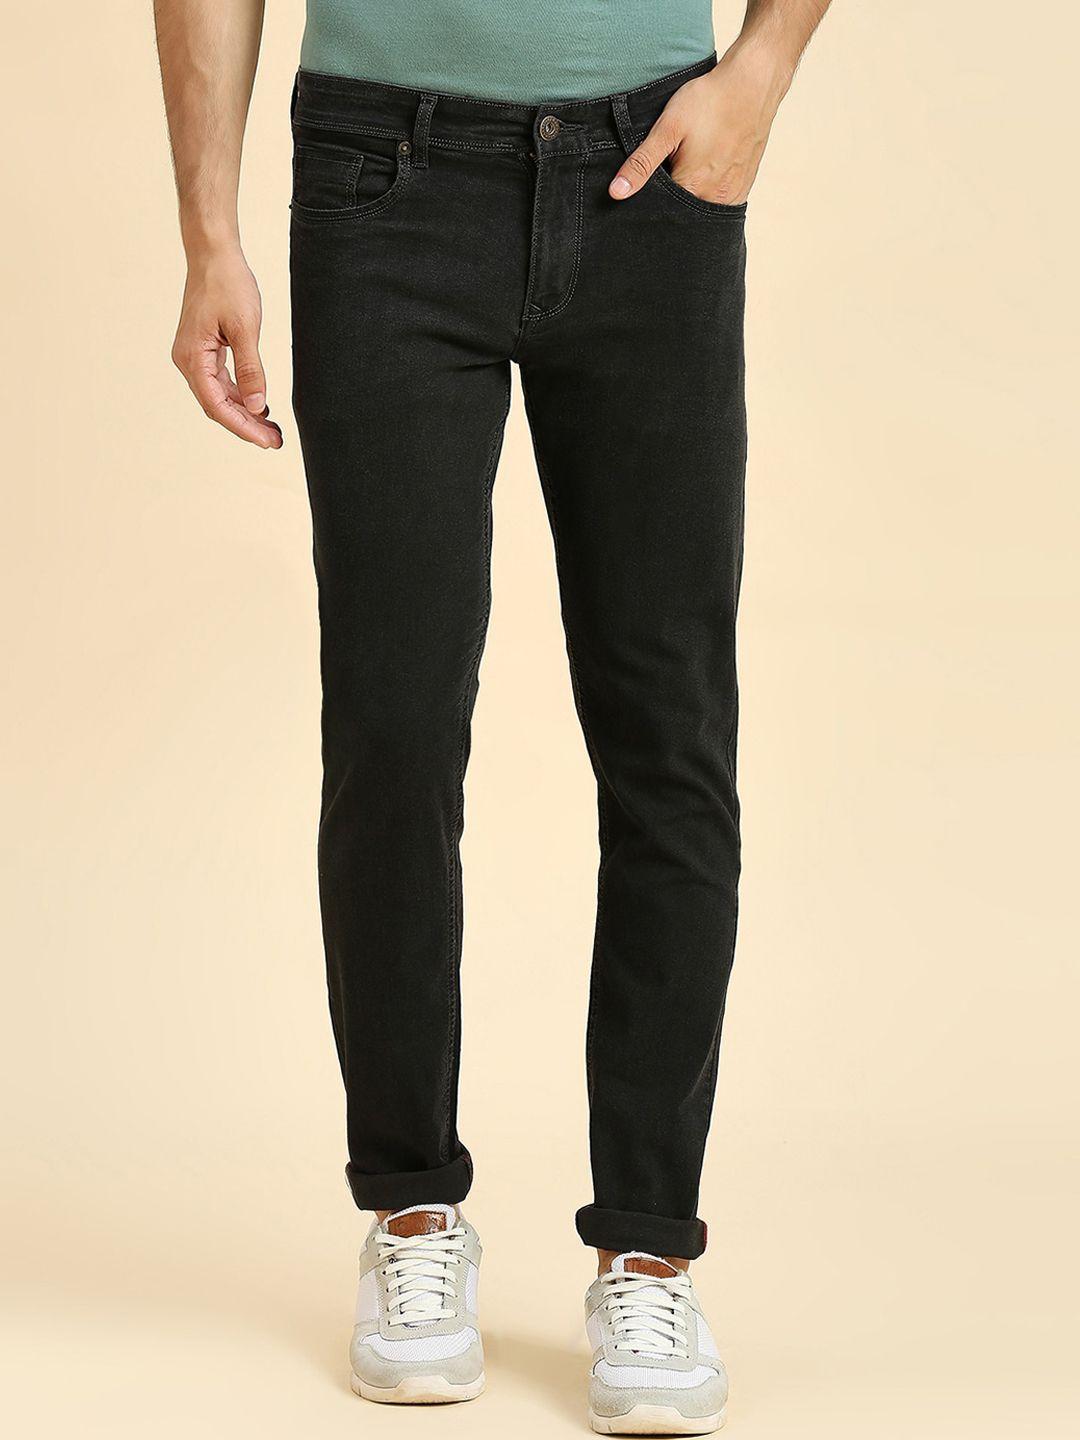 hj-hasasi-men-acid-wash-mid-rise-stretchable-clean-look-jeans